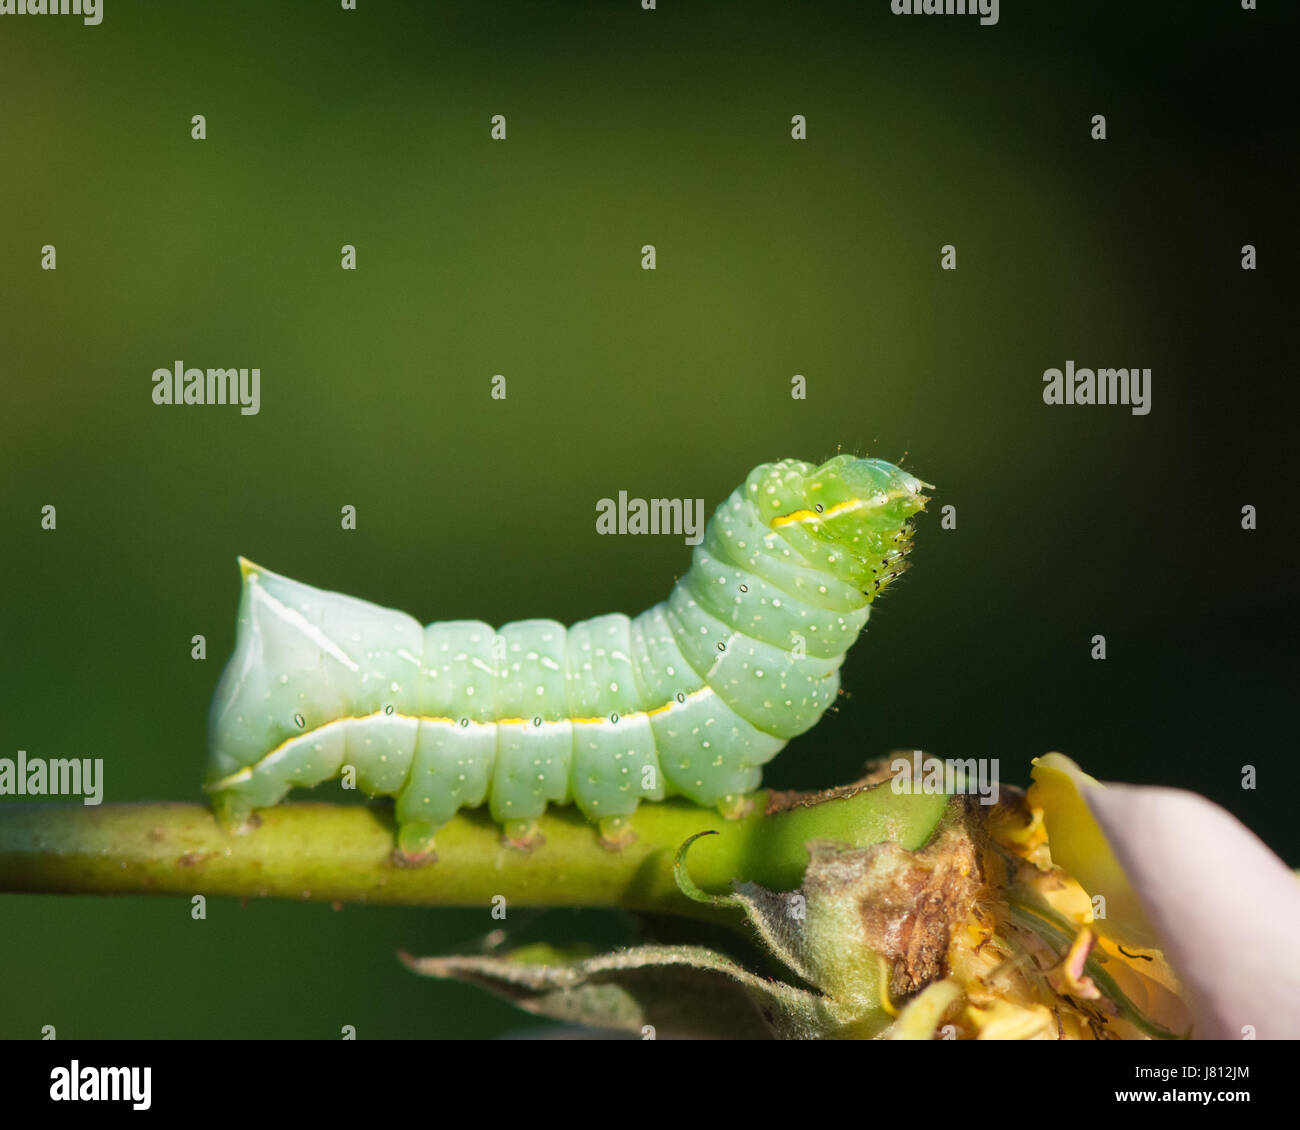 Caterpillar of the Copper Underwing moth feeding on a cultivated rose Stock Photo